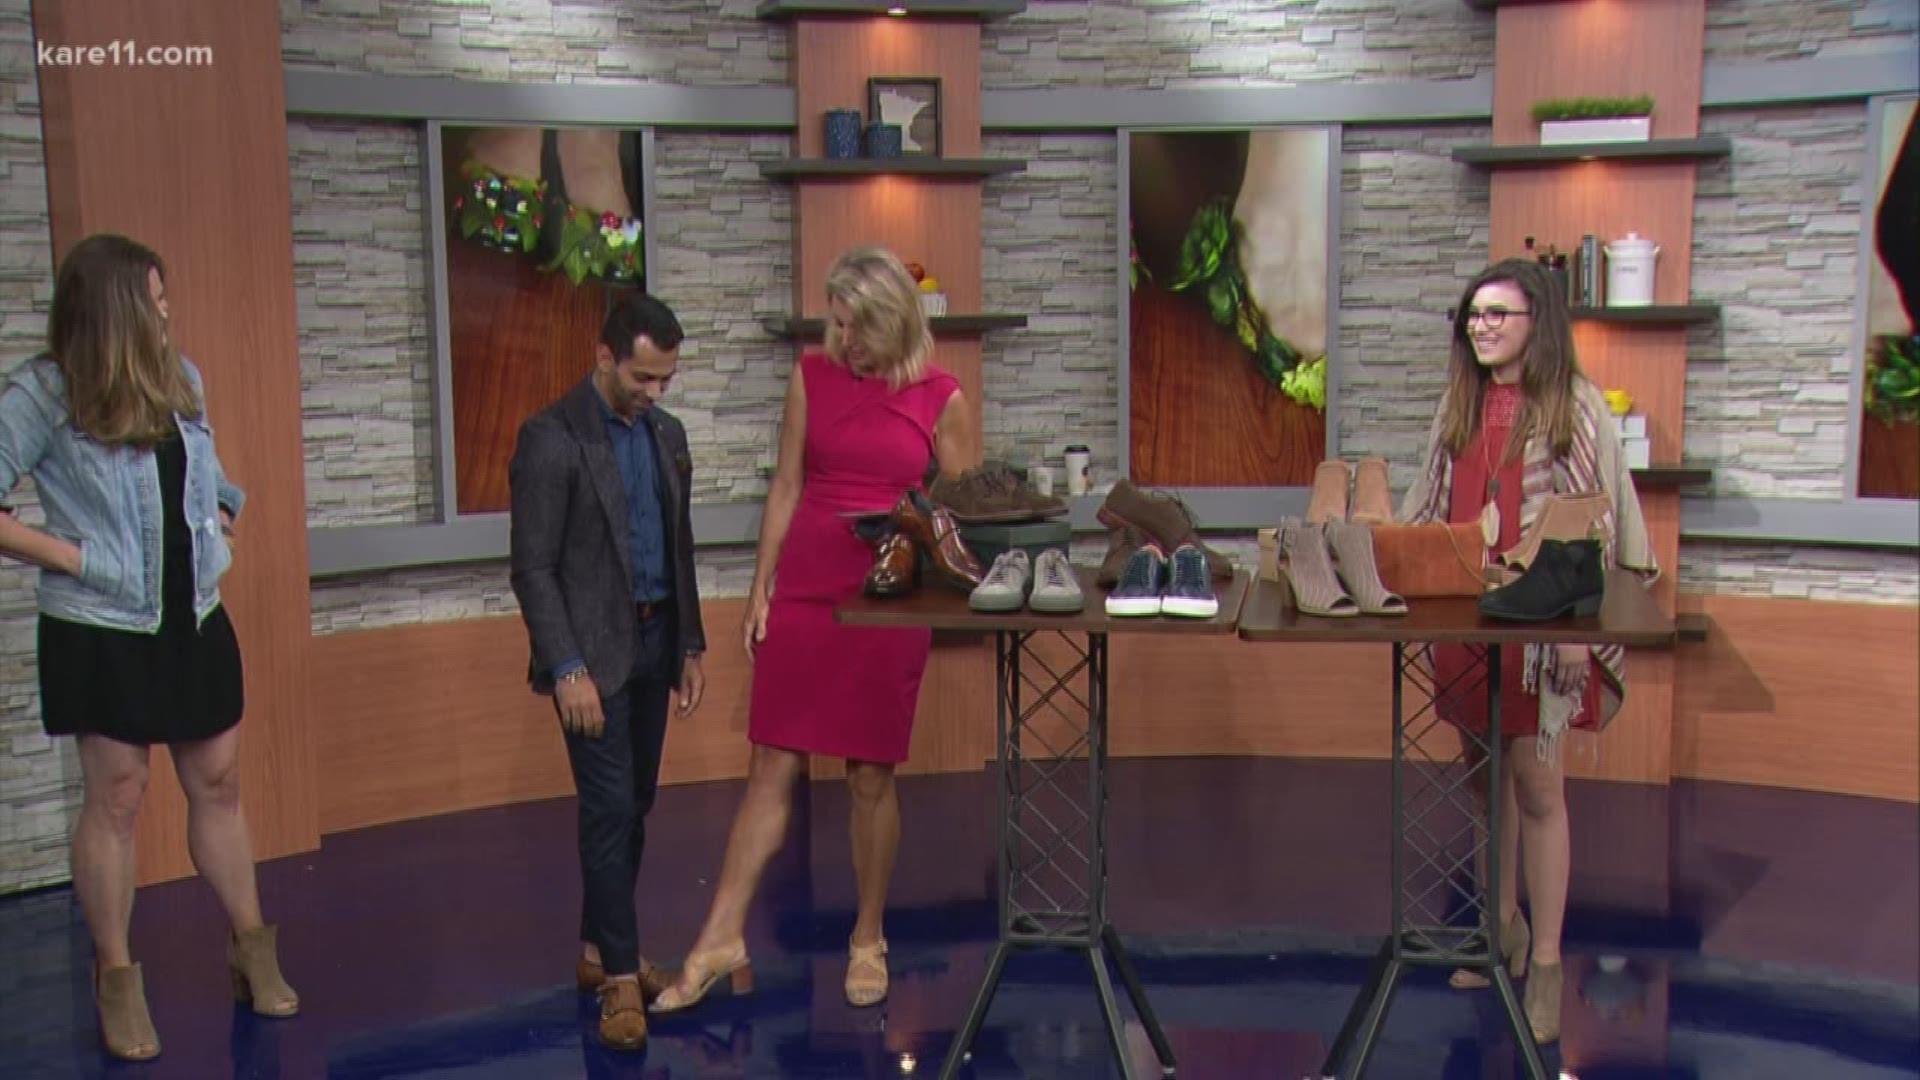 Laura Edstrom with Meals On Wheels joined KARE 11 this morning to discuss their upcoming fall fundraiser they're calling "Meals on Heels," an event where people are encouraged to wear your favorite, most fun shoes! Martin Patrick and Kathy from Francesca'